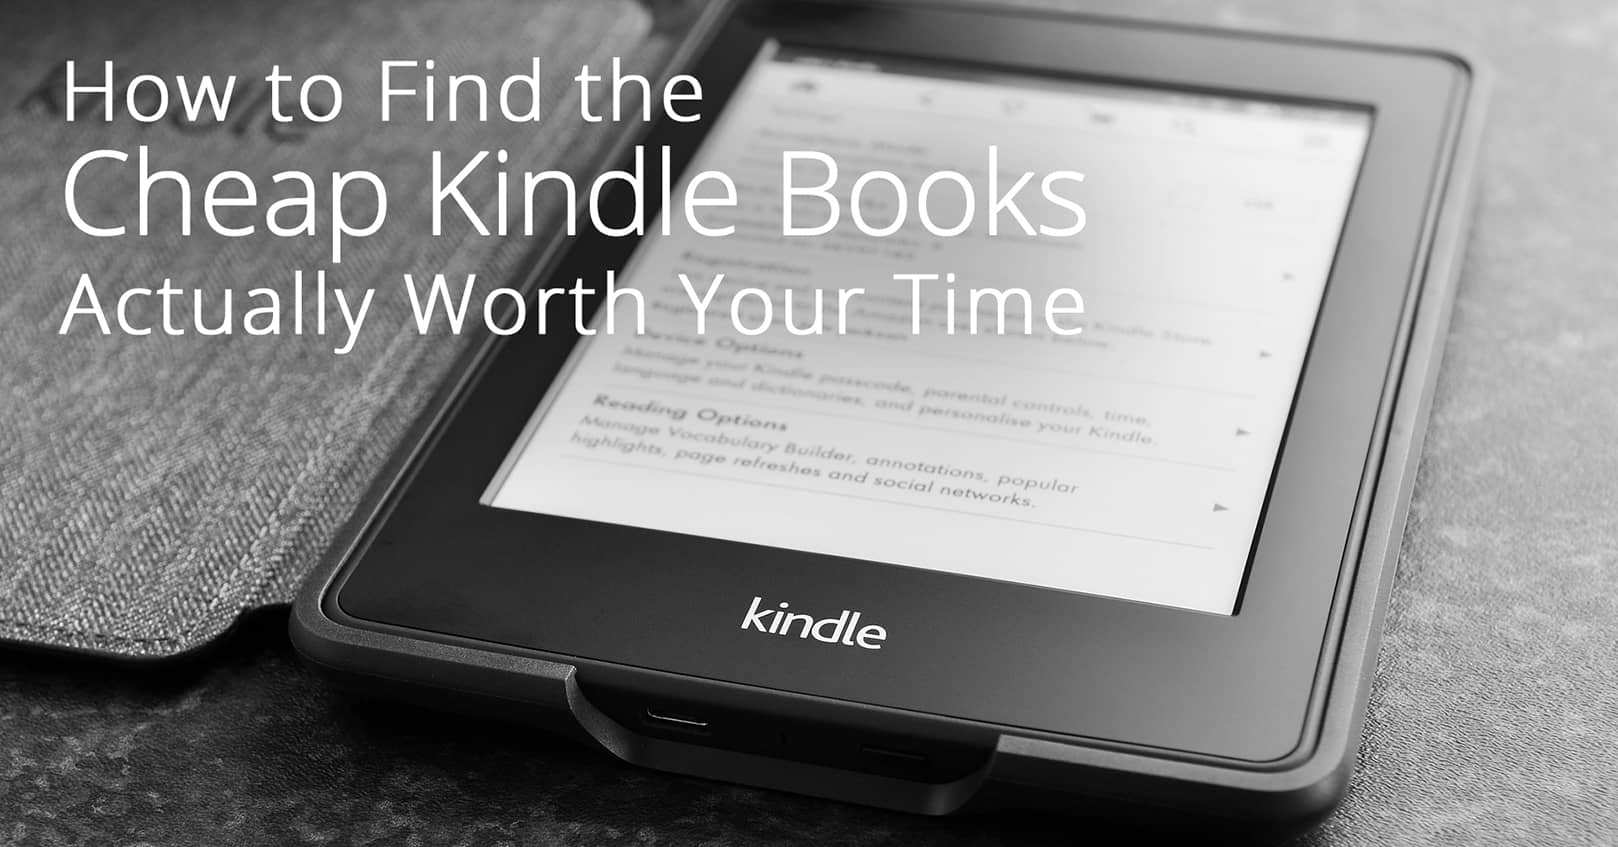 How to Find the Cheap Kindle Books Actually Worth Your Time